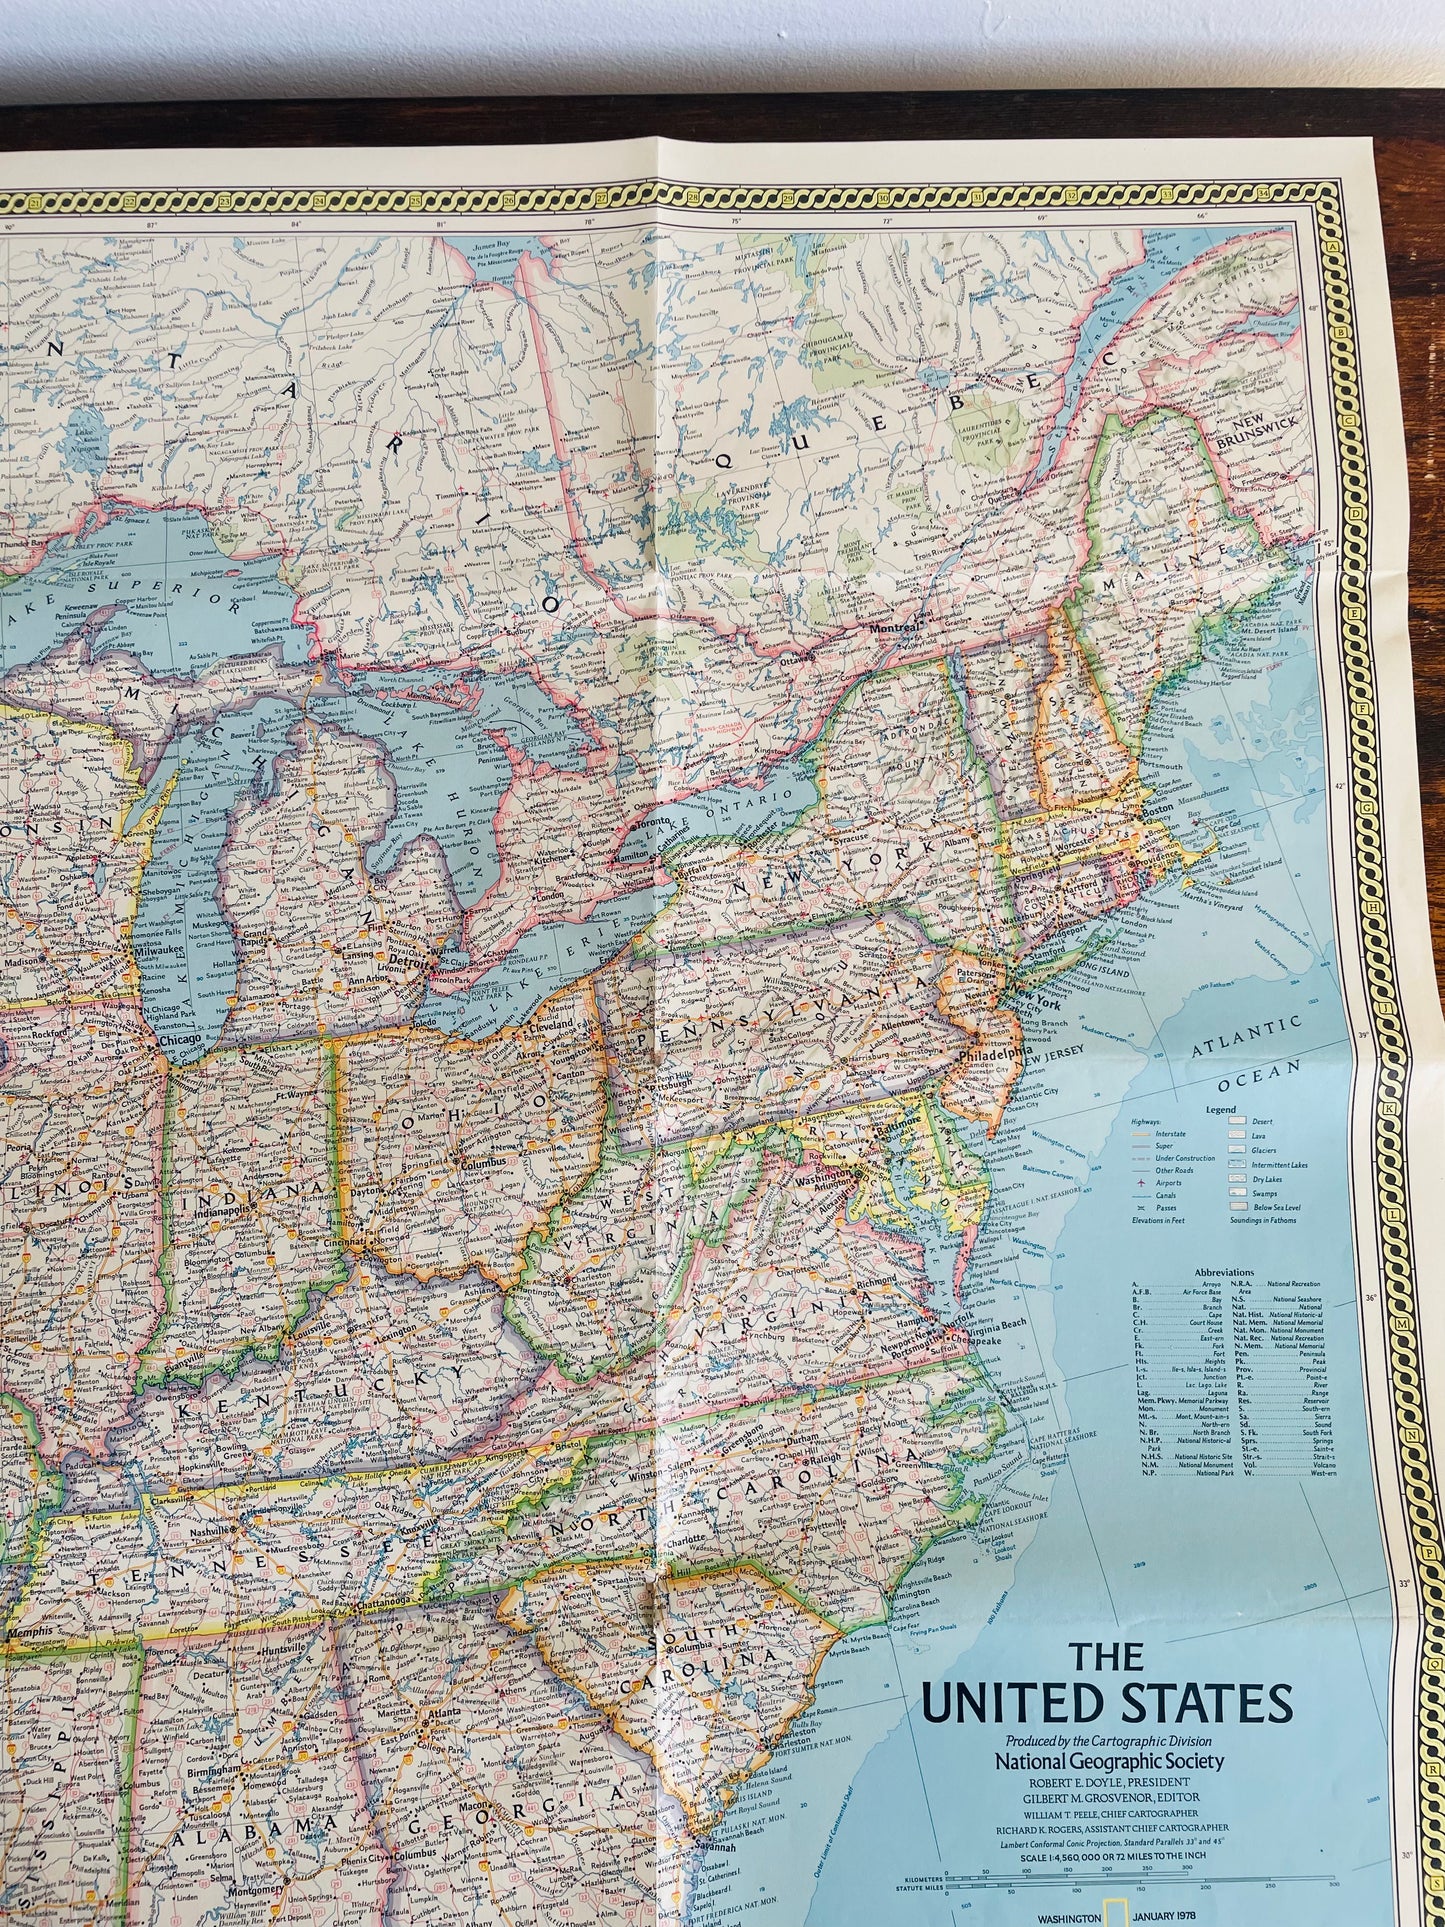 January 1978 National Geographic Giant USA Wall Map